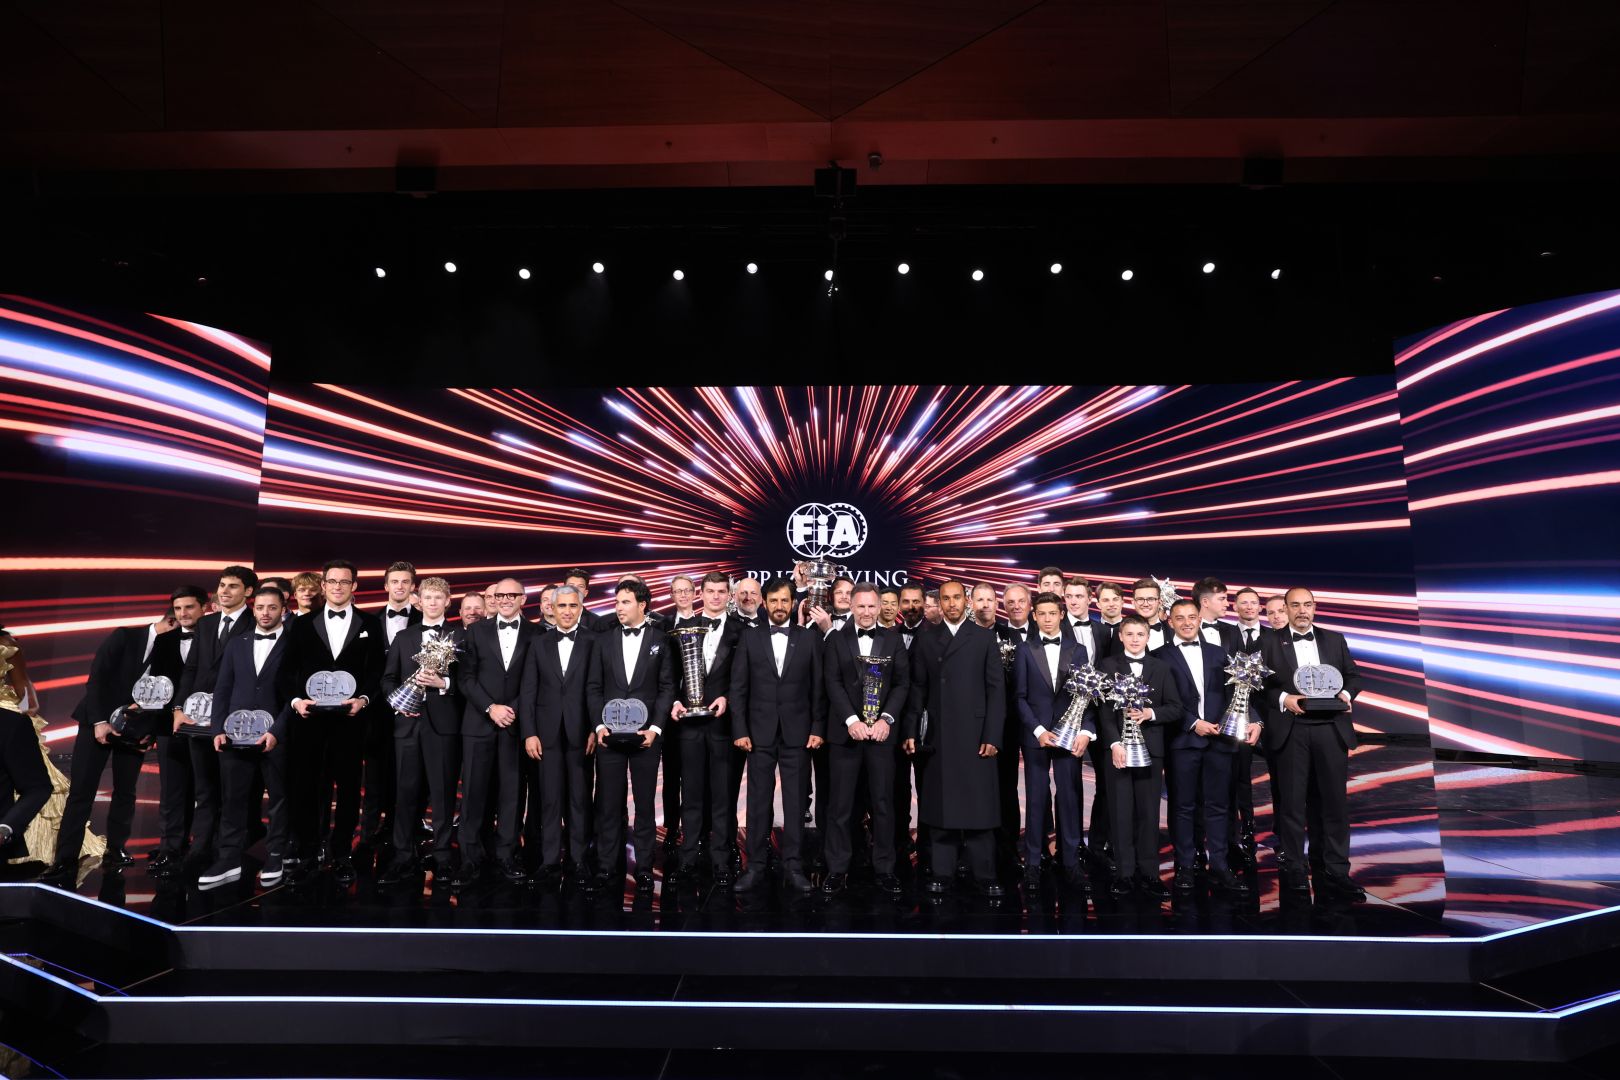 FIA Prize-Giving 2023 in Baku remembered for its magnificence [PHOTOS/VIDEO]